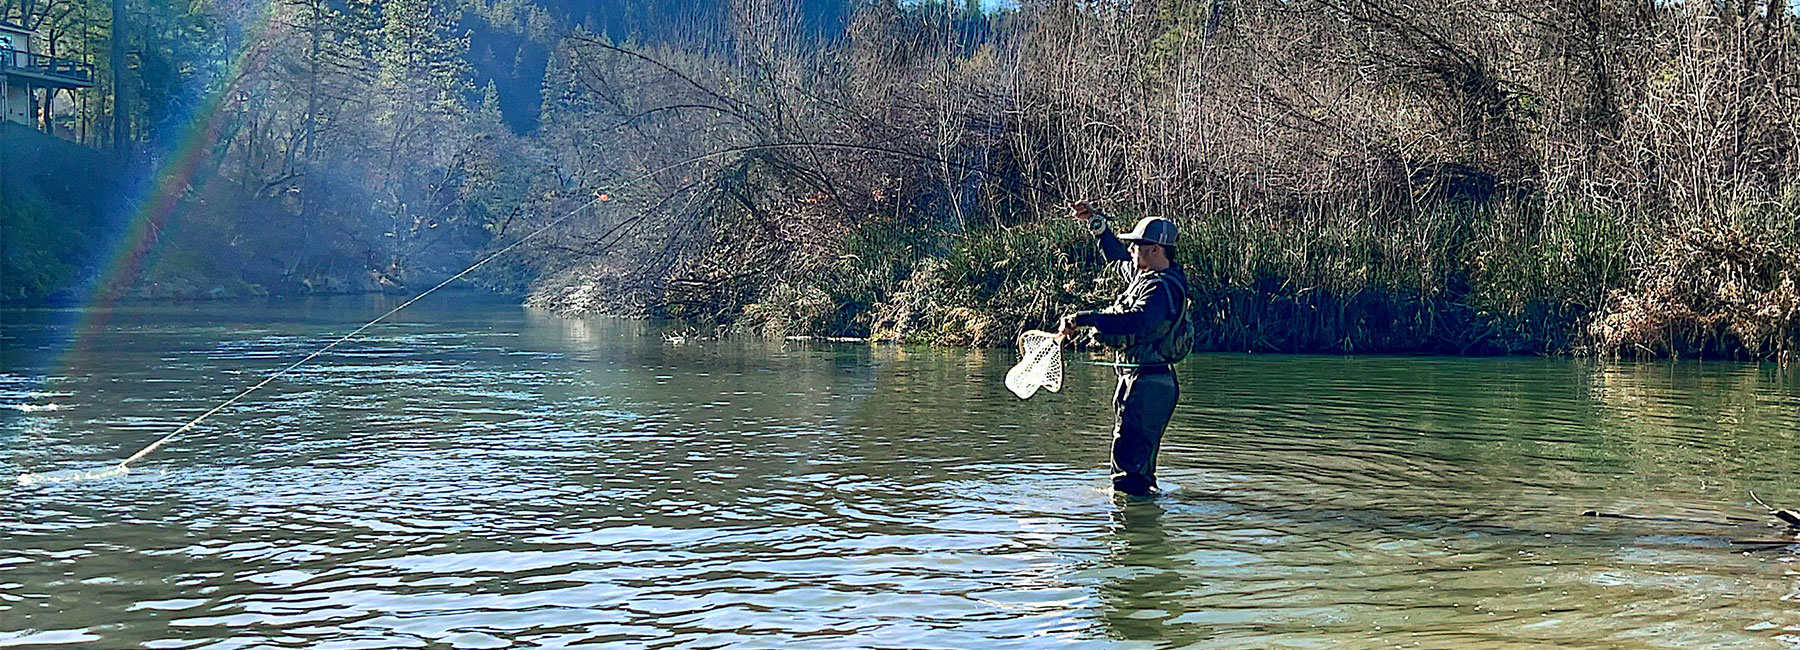 Joel Crandall fighting a fish while wading